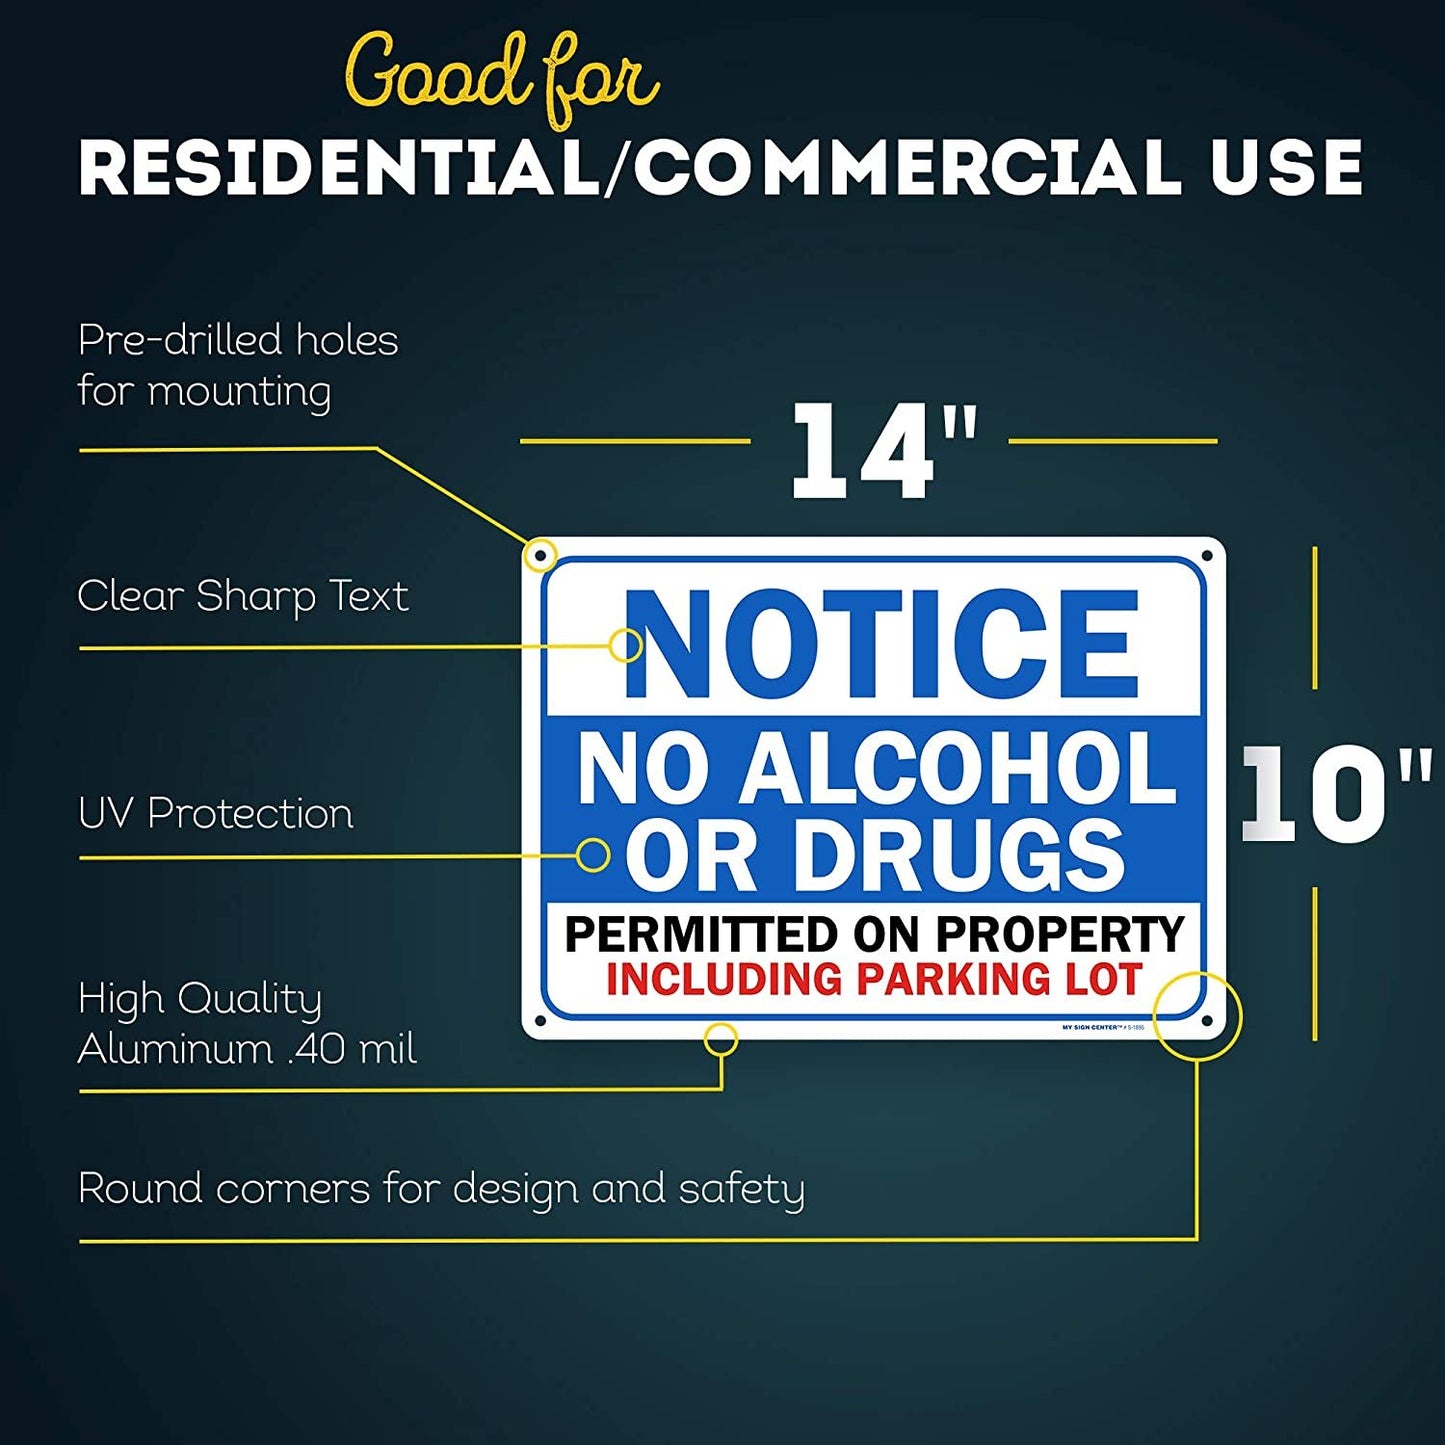 Notice Property Rules Sign No Alcohol Or Drugs Permitted